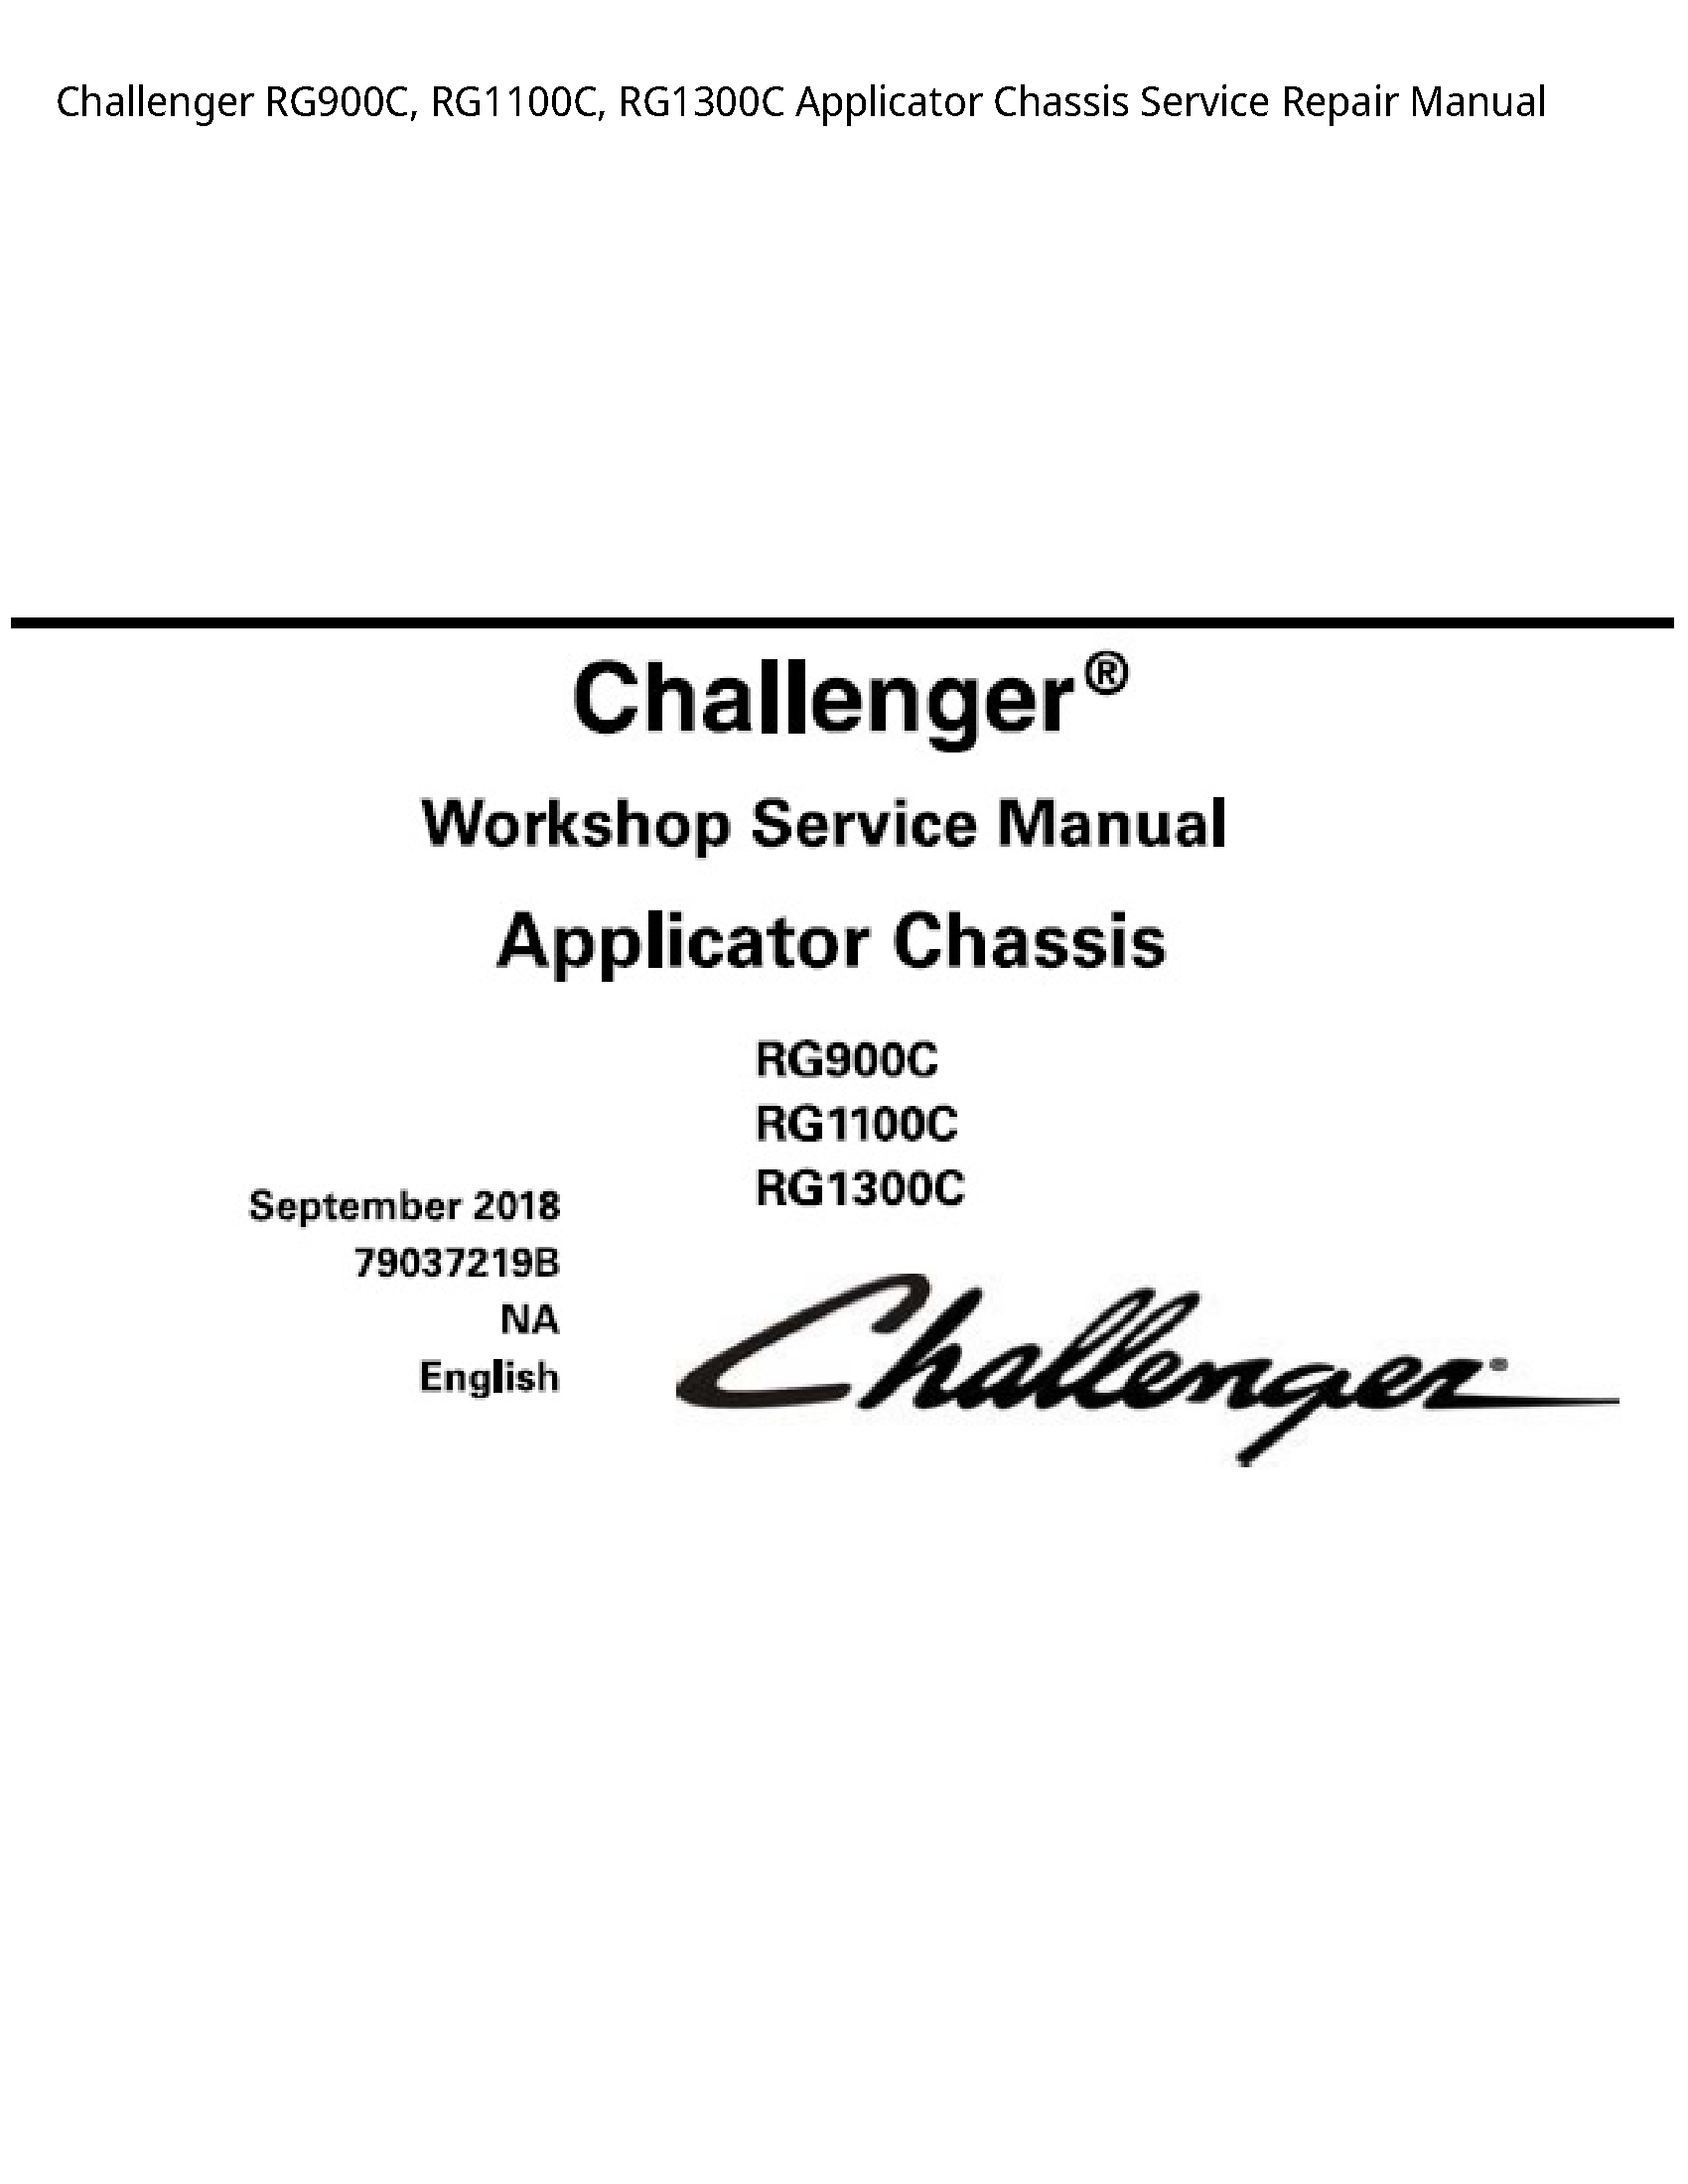 Challenger RG900C Applicator Chassis manual